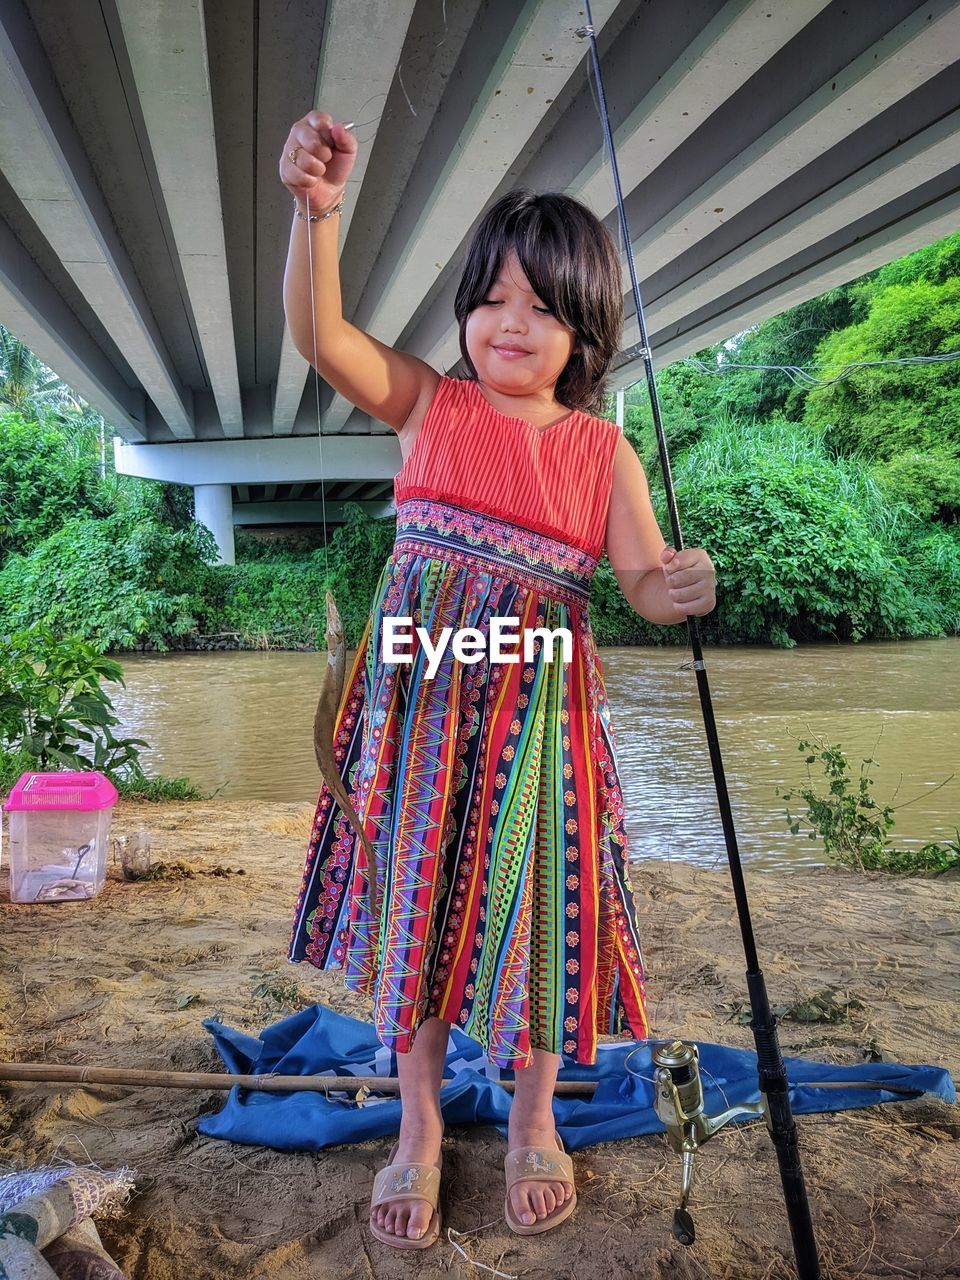 A girl holding a caught fish in front of a river.